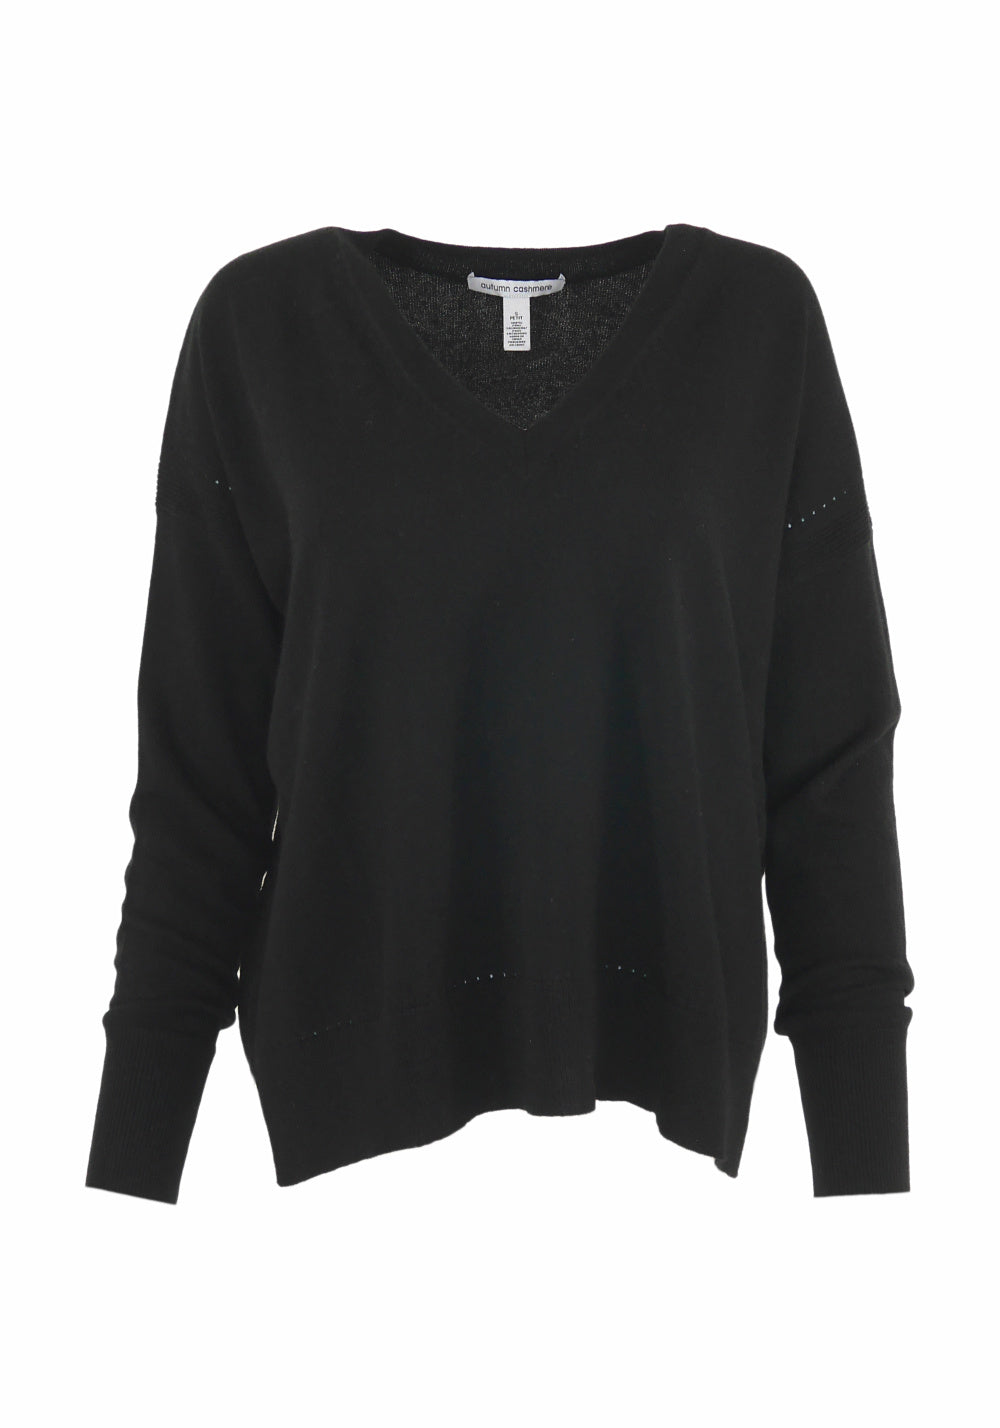 RELAXED V-NECK CASHMERE SWEATER (BLACK) - AUTUMN CASHMERE